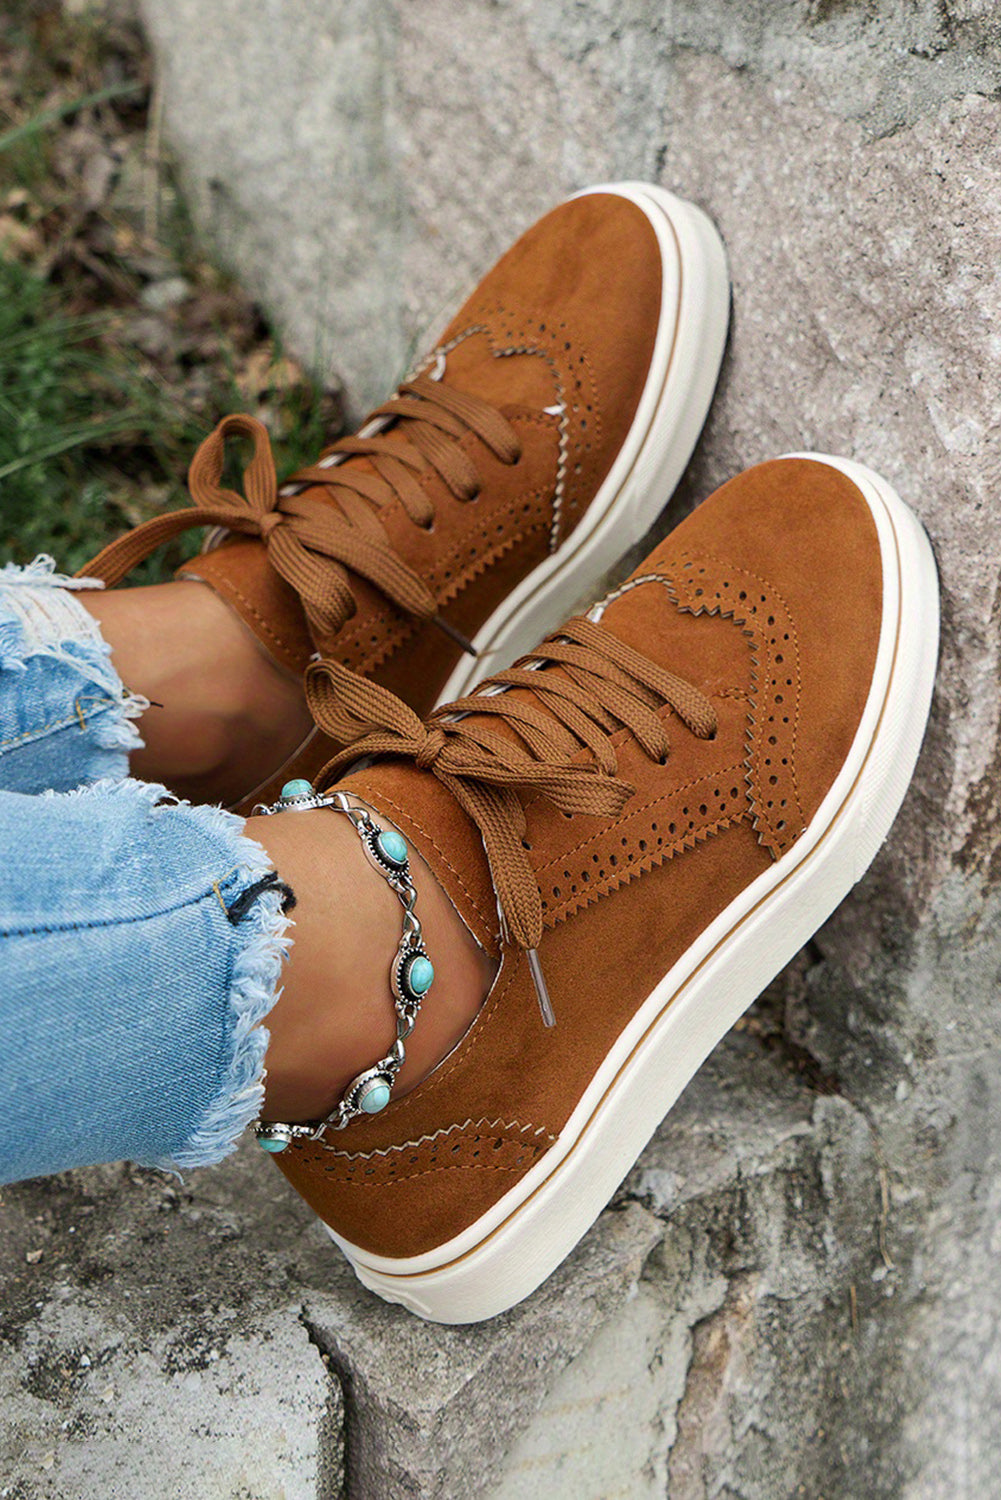 Chestnut Suede Eyelet Lace-Up Casual Sneakers Women's Shoes JT's Designer Fashion